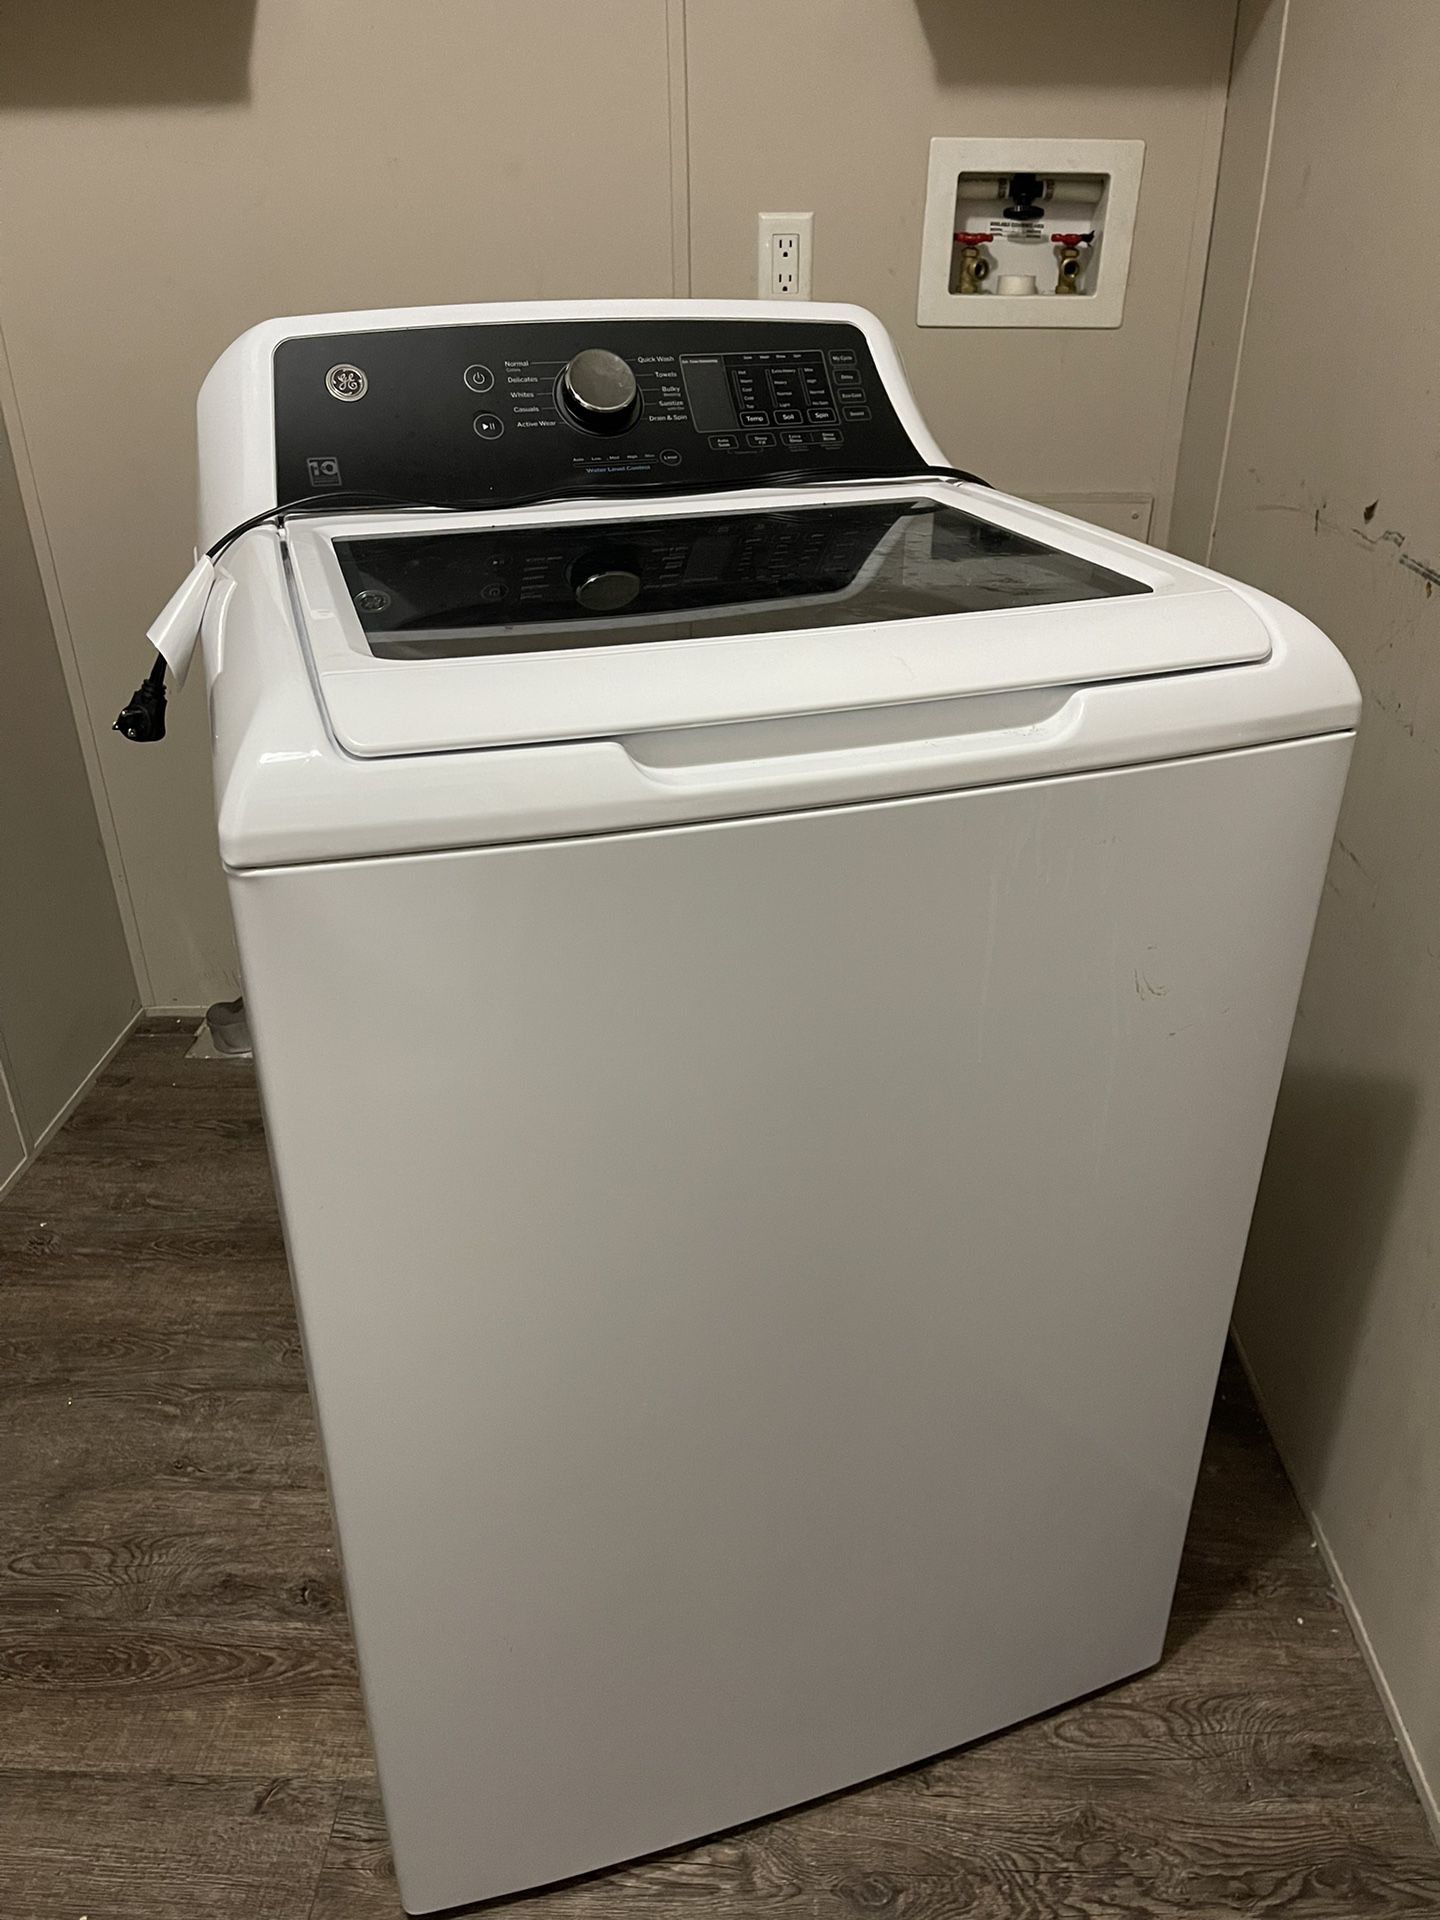 GE® 4.5 cu. ft. Capacity Washer with Water Level Control